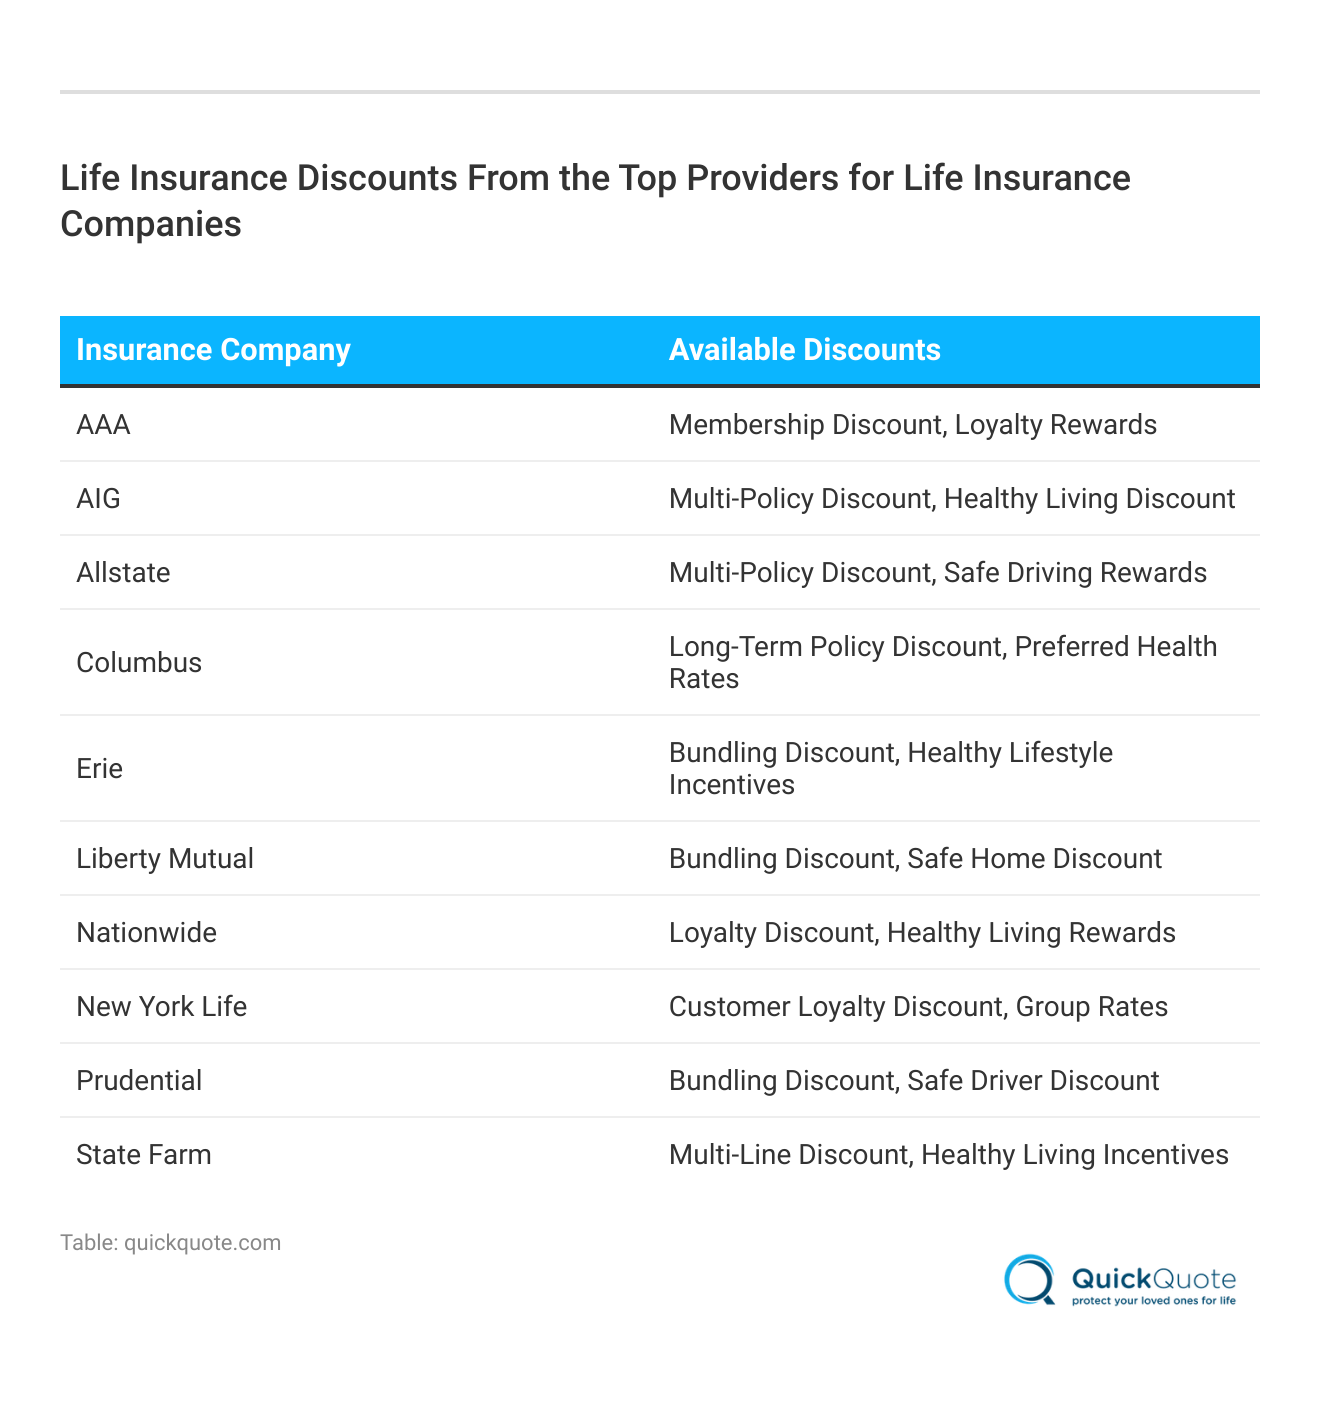 <h3>Life Insurance Discounts From the Top Providers for Life Insurance Companies</h3> 